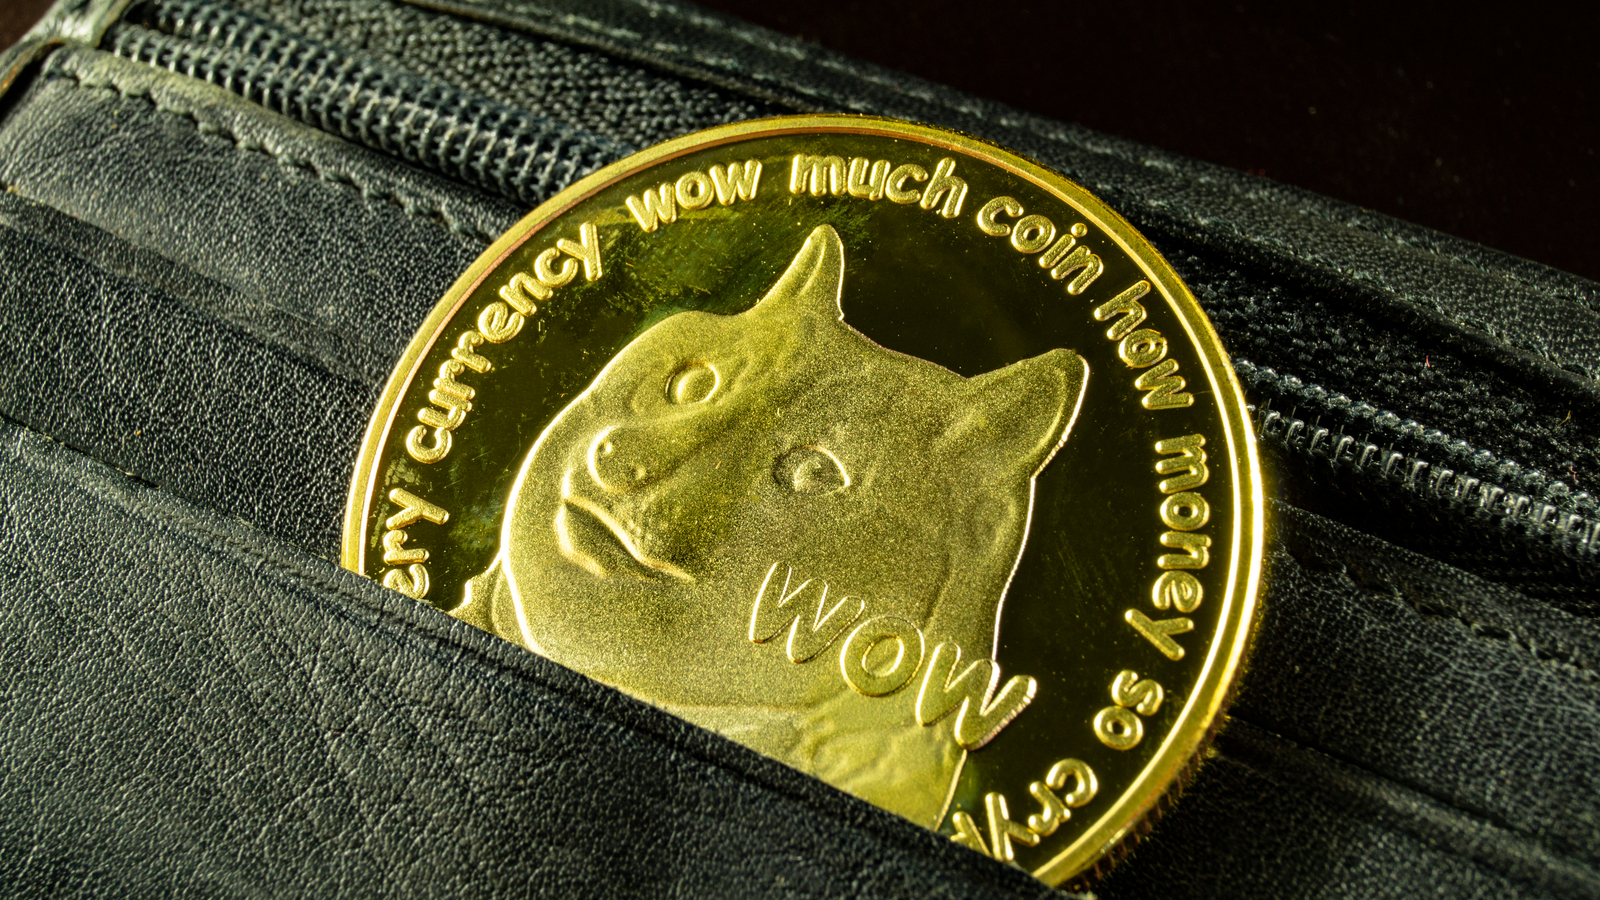 Dogecoin Marks 10th Anniversary, Hits $0.10 For First Time in a Year